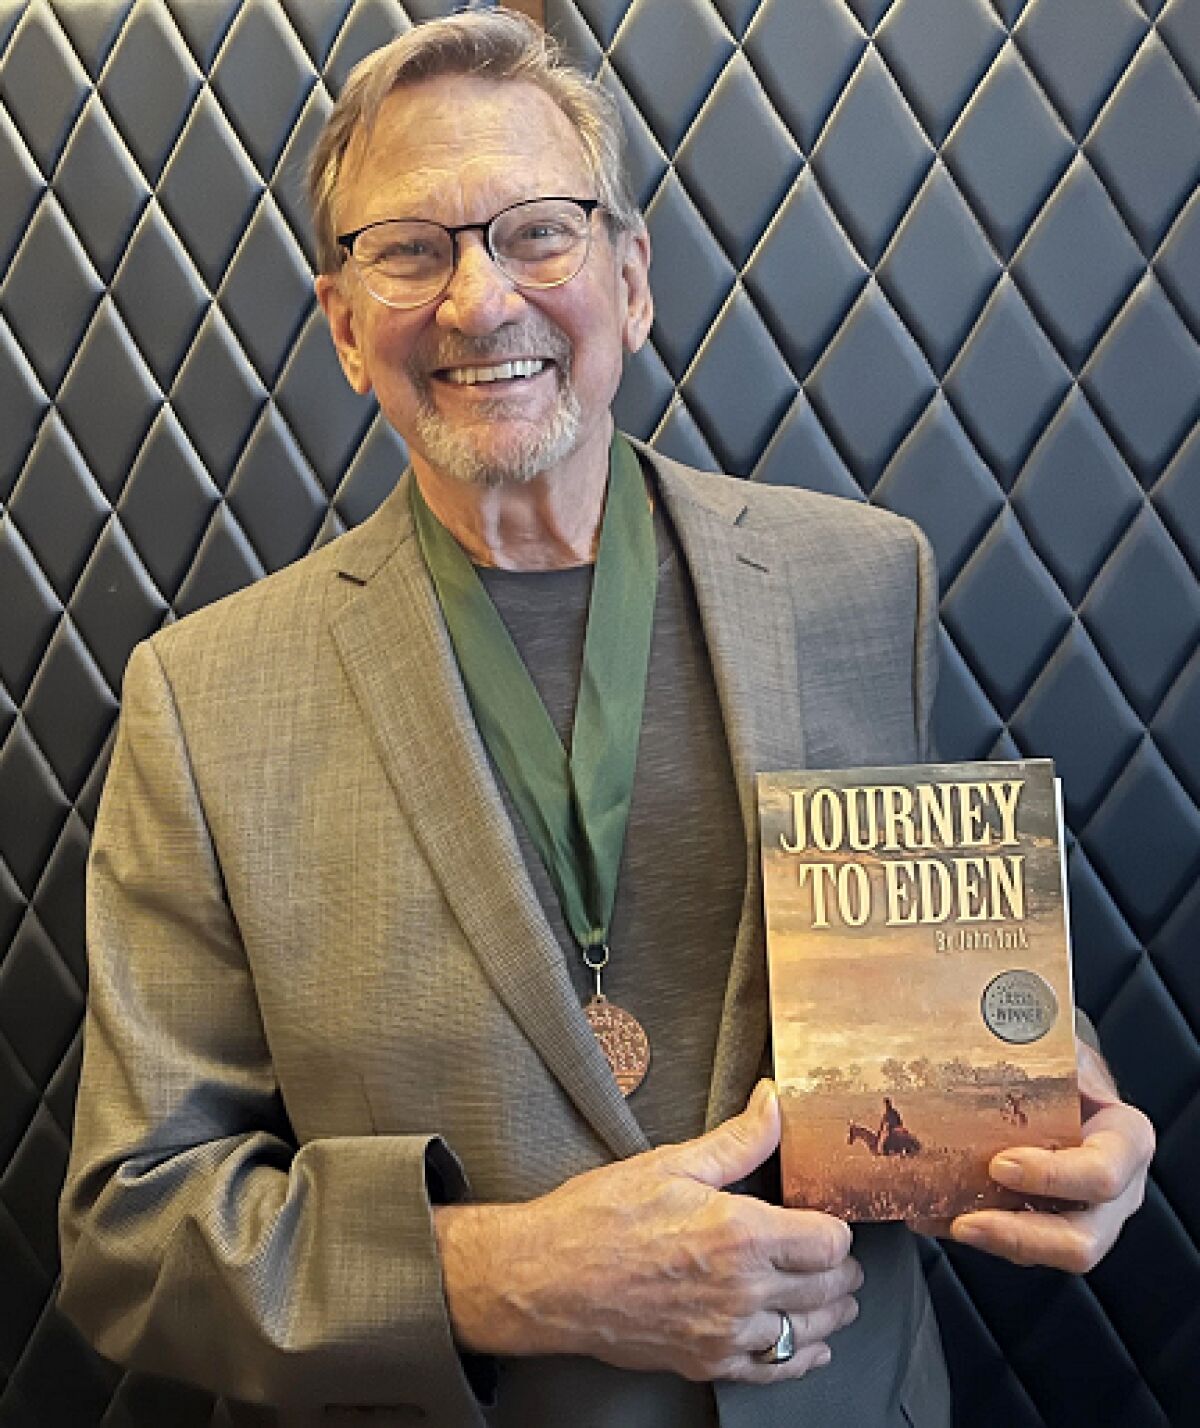 Author John York, former Hellanback Ranch Winery owner who moved to Florida, won an award for his book, “Journey to Eden.”